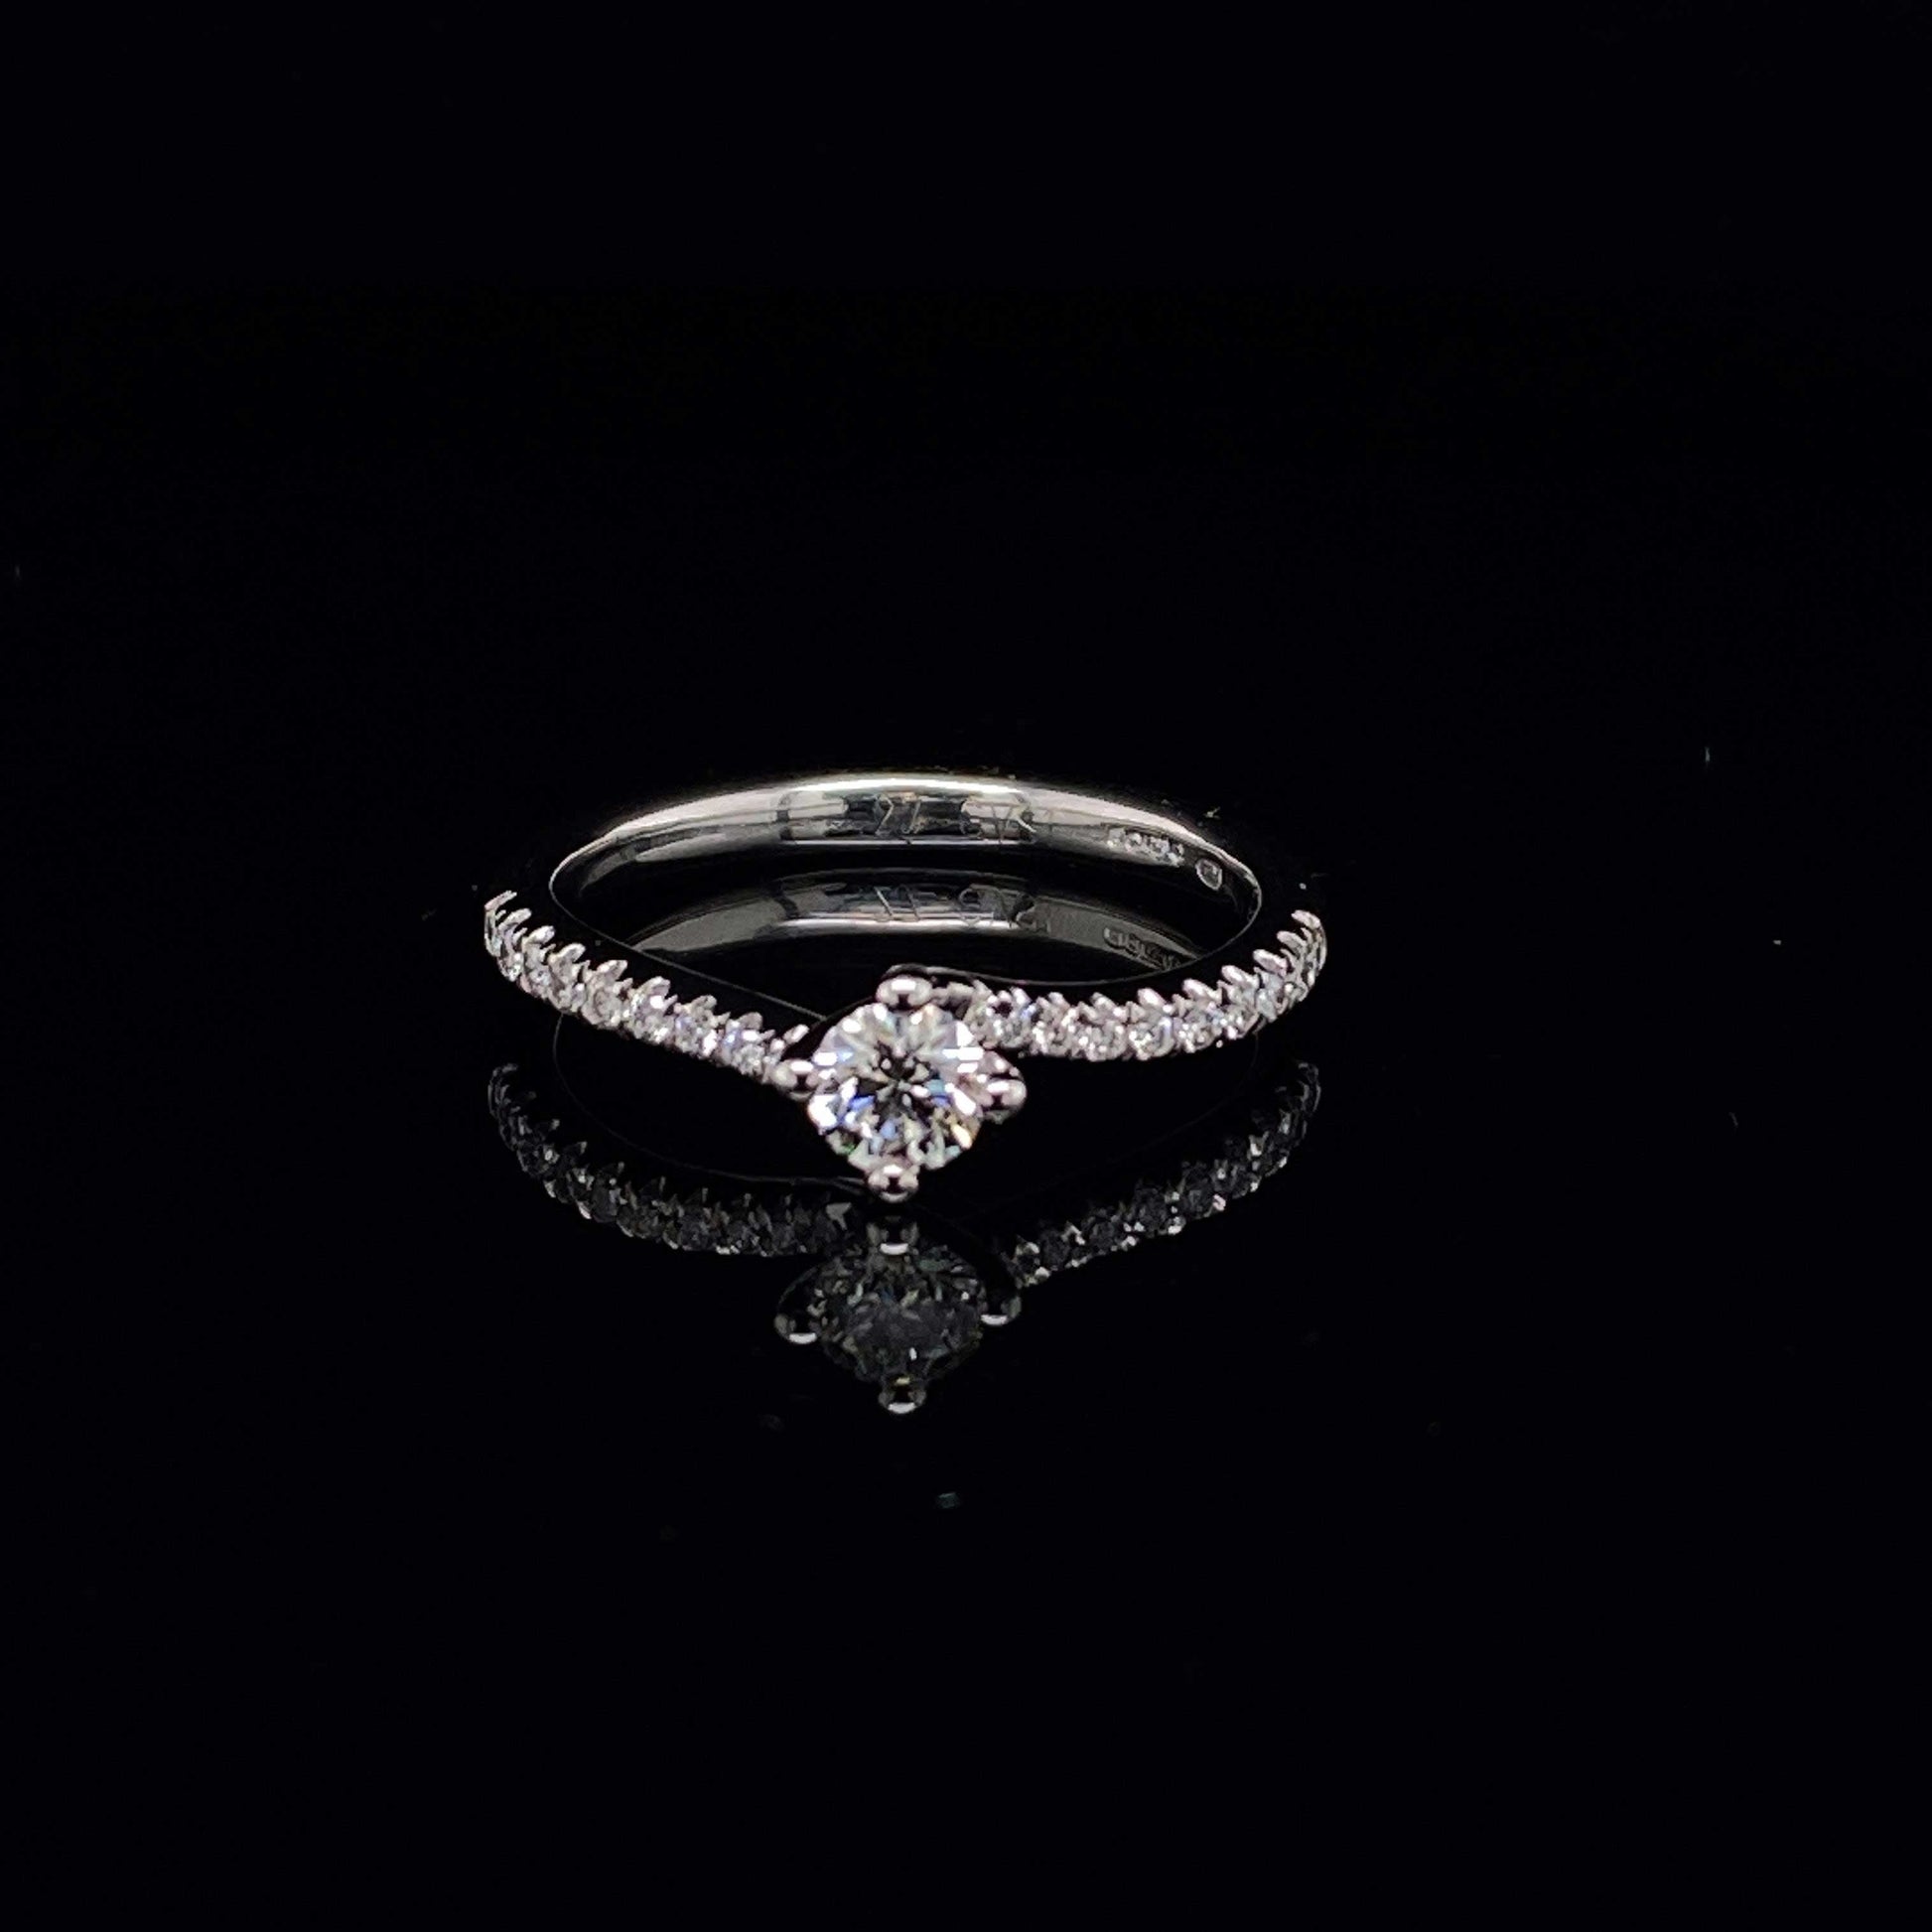 0.27ct GIA Certified Round Brilliant Diamond Ring With Diamond Set Shoulders